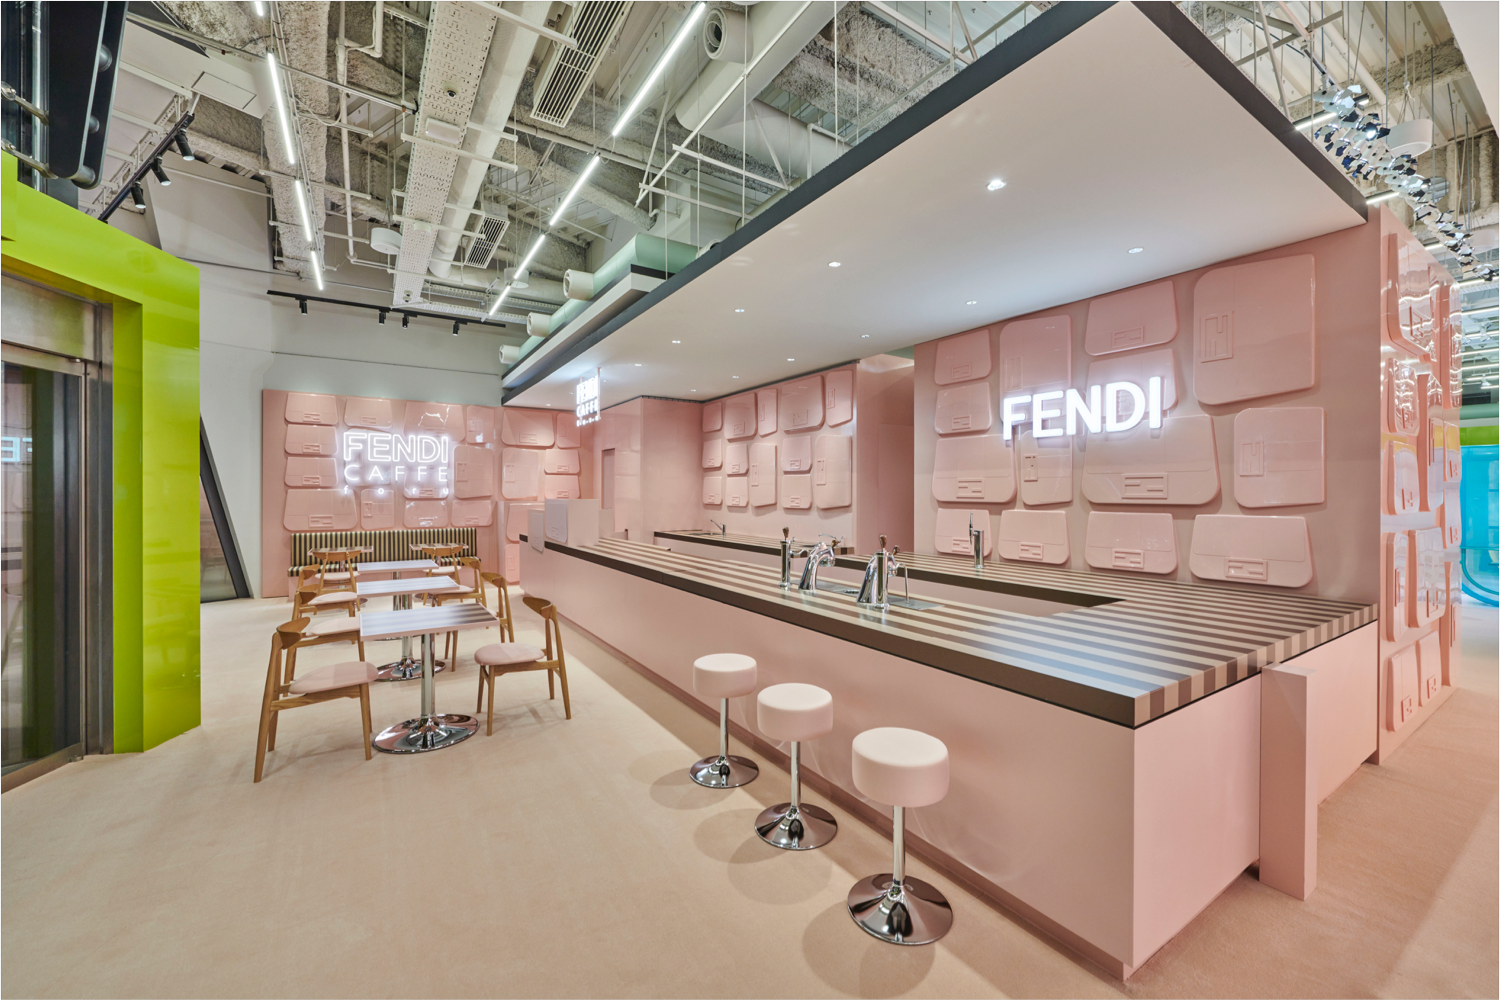 OPENING OF THE FENDI GINZA POP-UP STORE